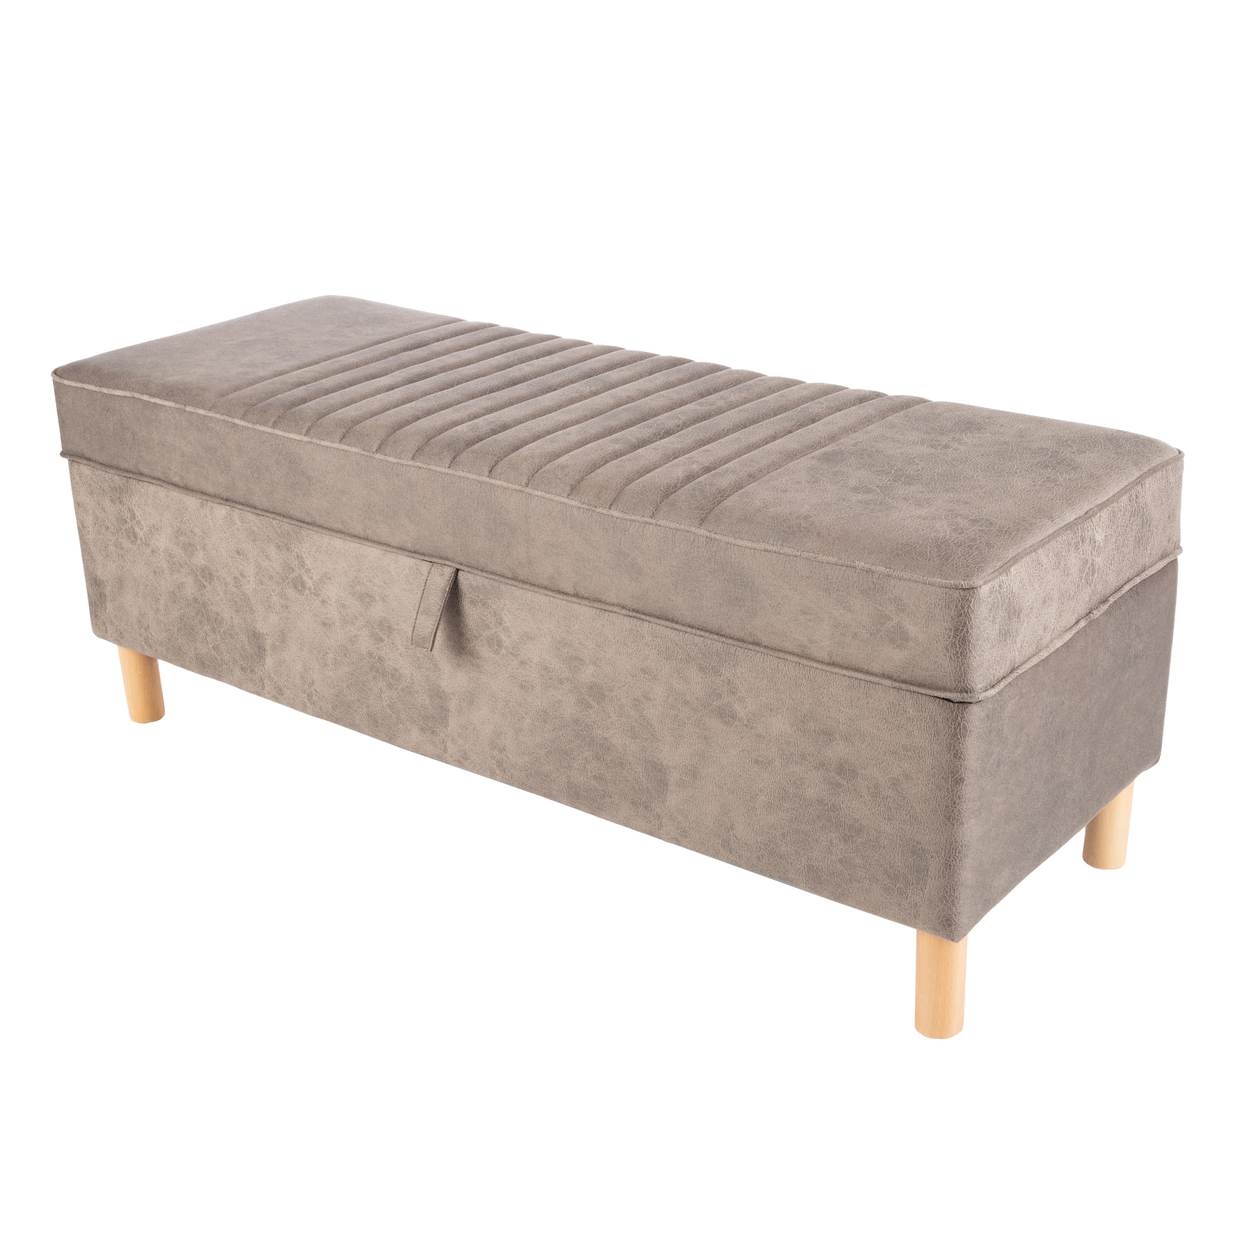 Storage Ottoman Footrest Suede Upholstered Linen Chest Bedroom 15.7 In Tall